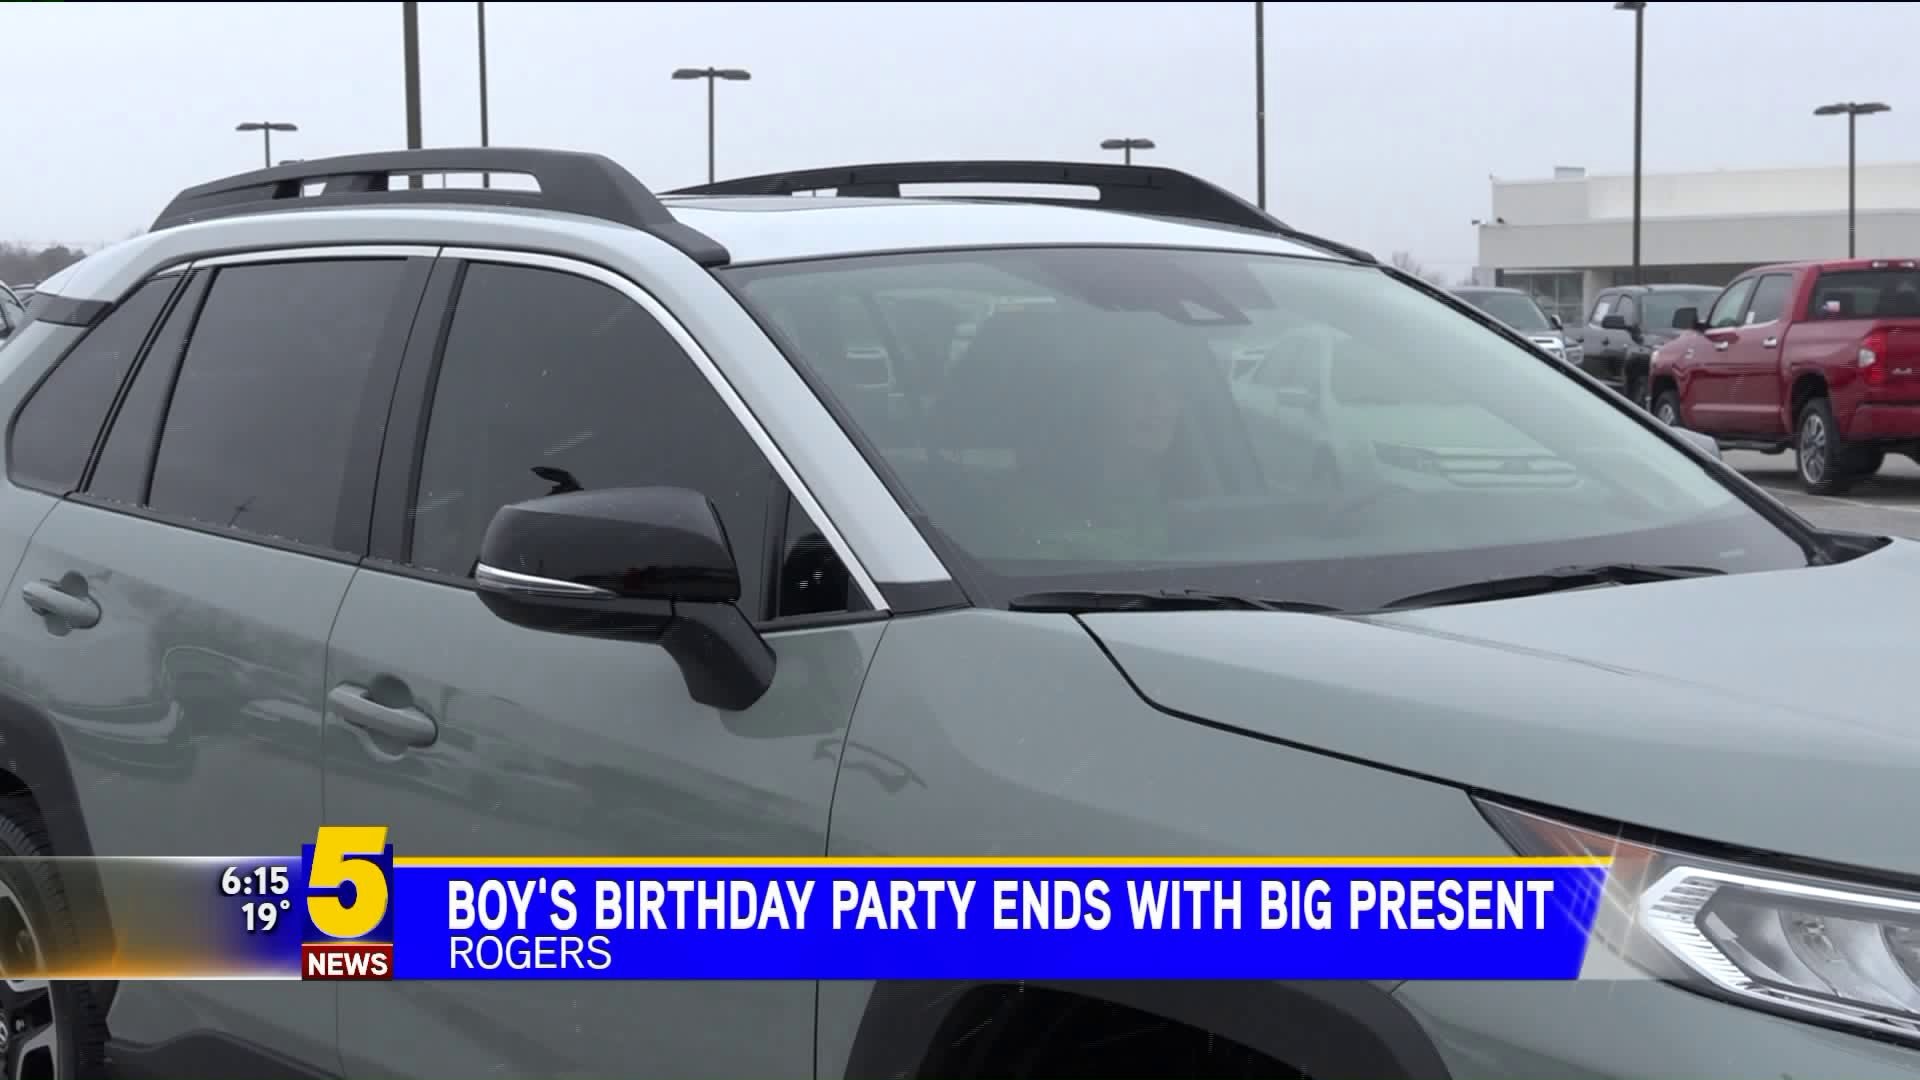 Boys Birthday Party Ends With Big Present in Rogers